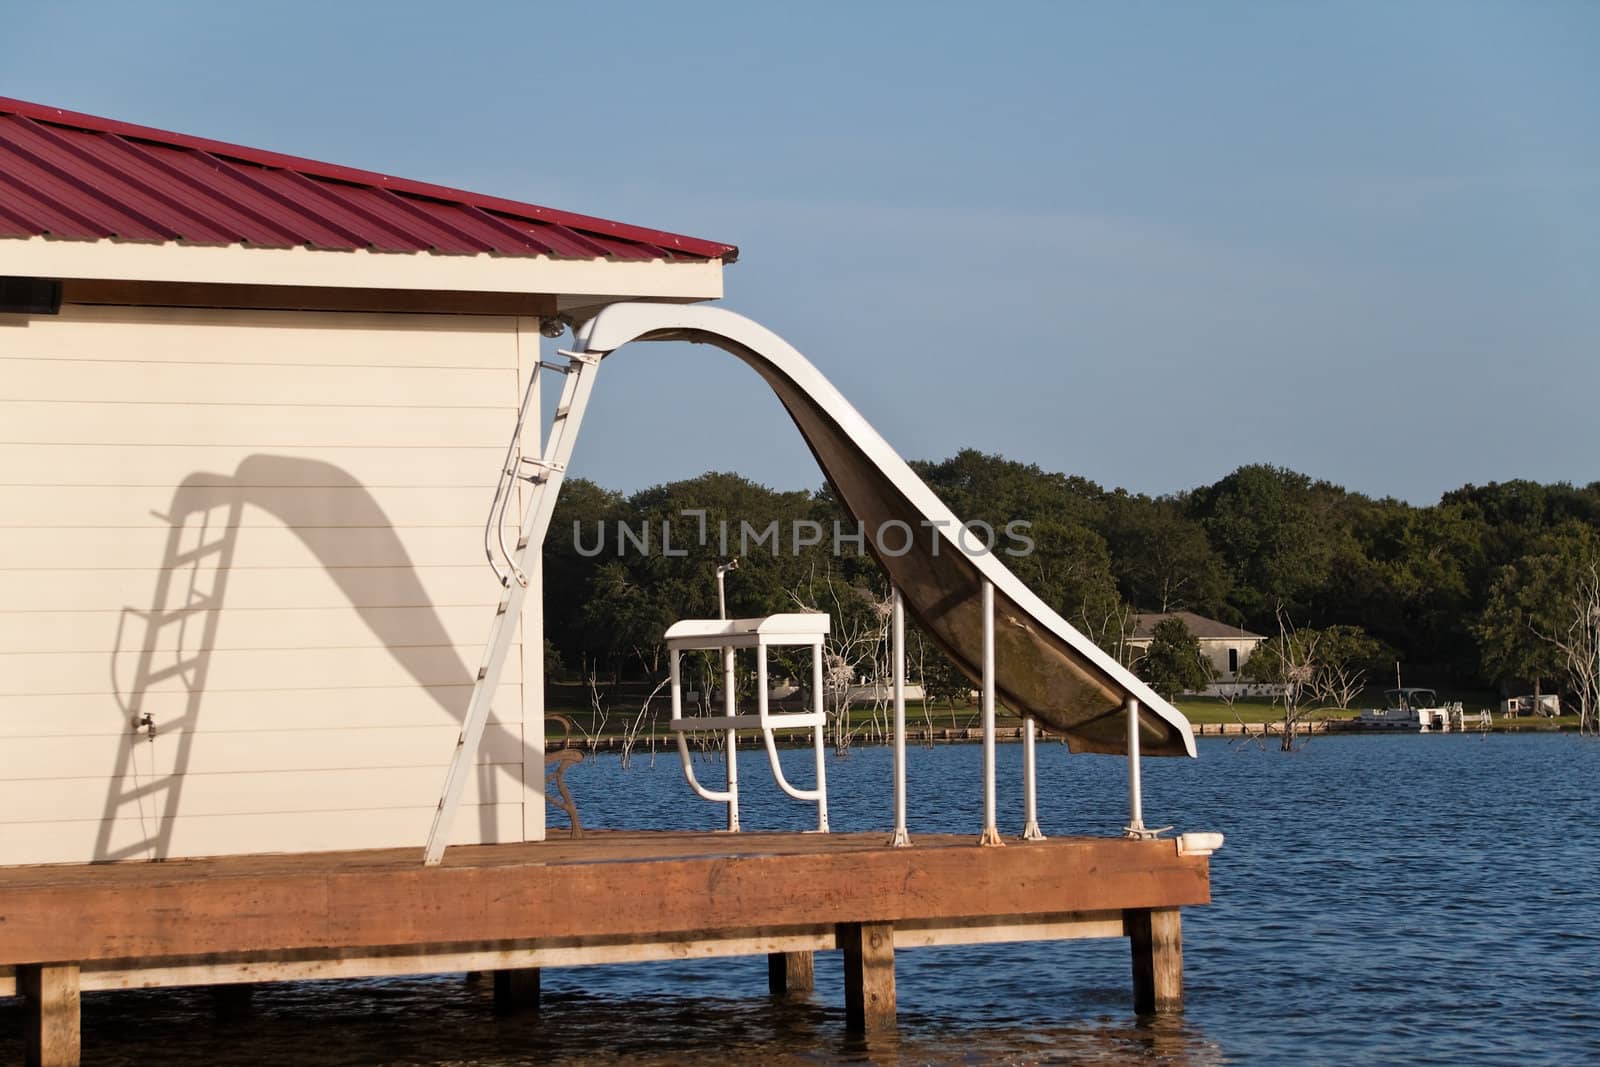 A waterslide on the end of a wooden dock